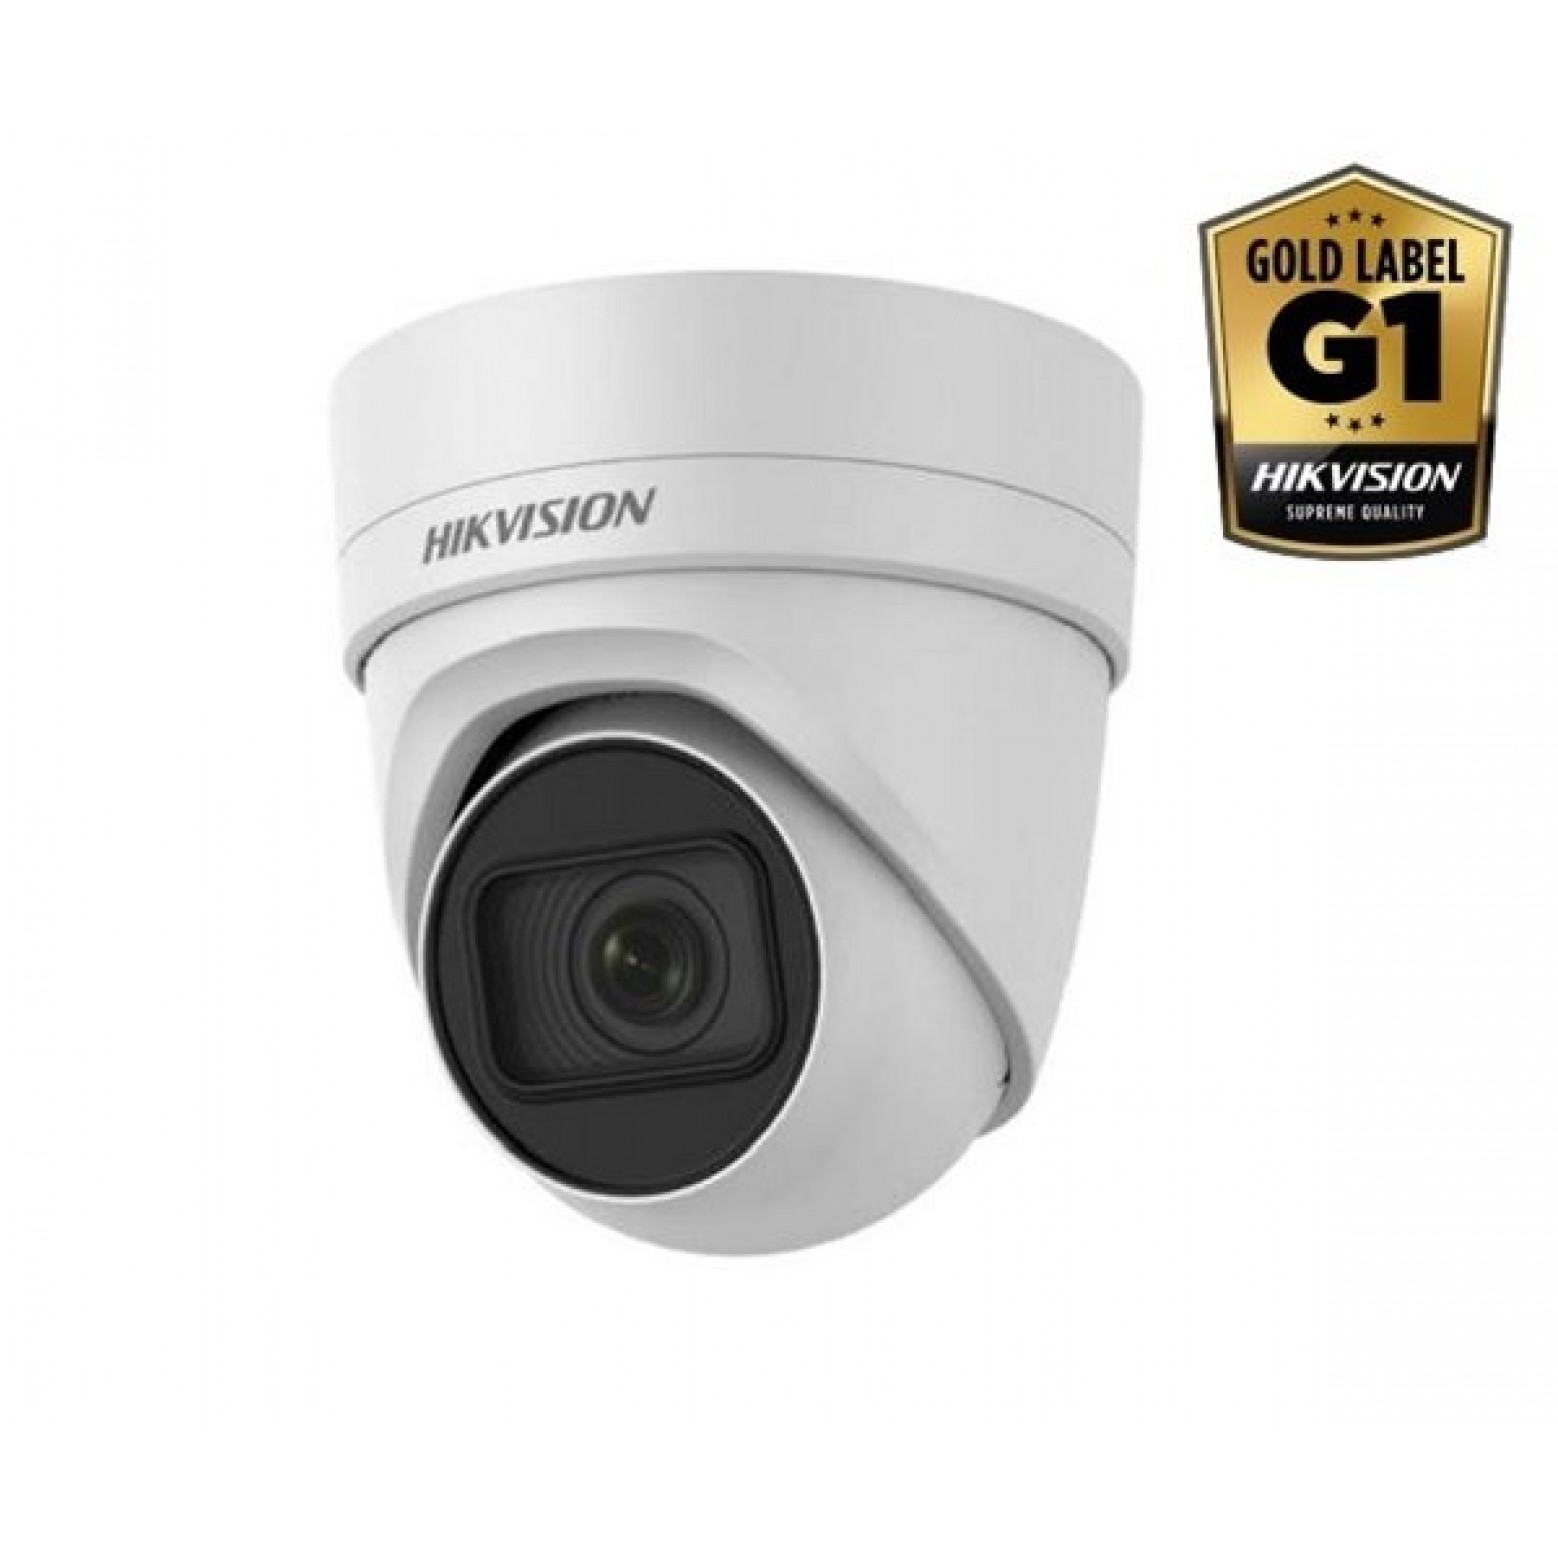 Hikvision DS-2CD2H25FWD-IZS 2MP, 2,8~12mm motorzoom, 30m IR, WDR, Ultra Low Light